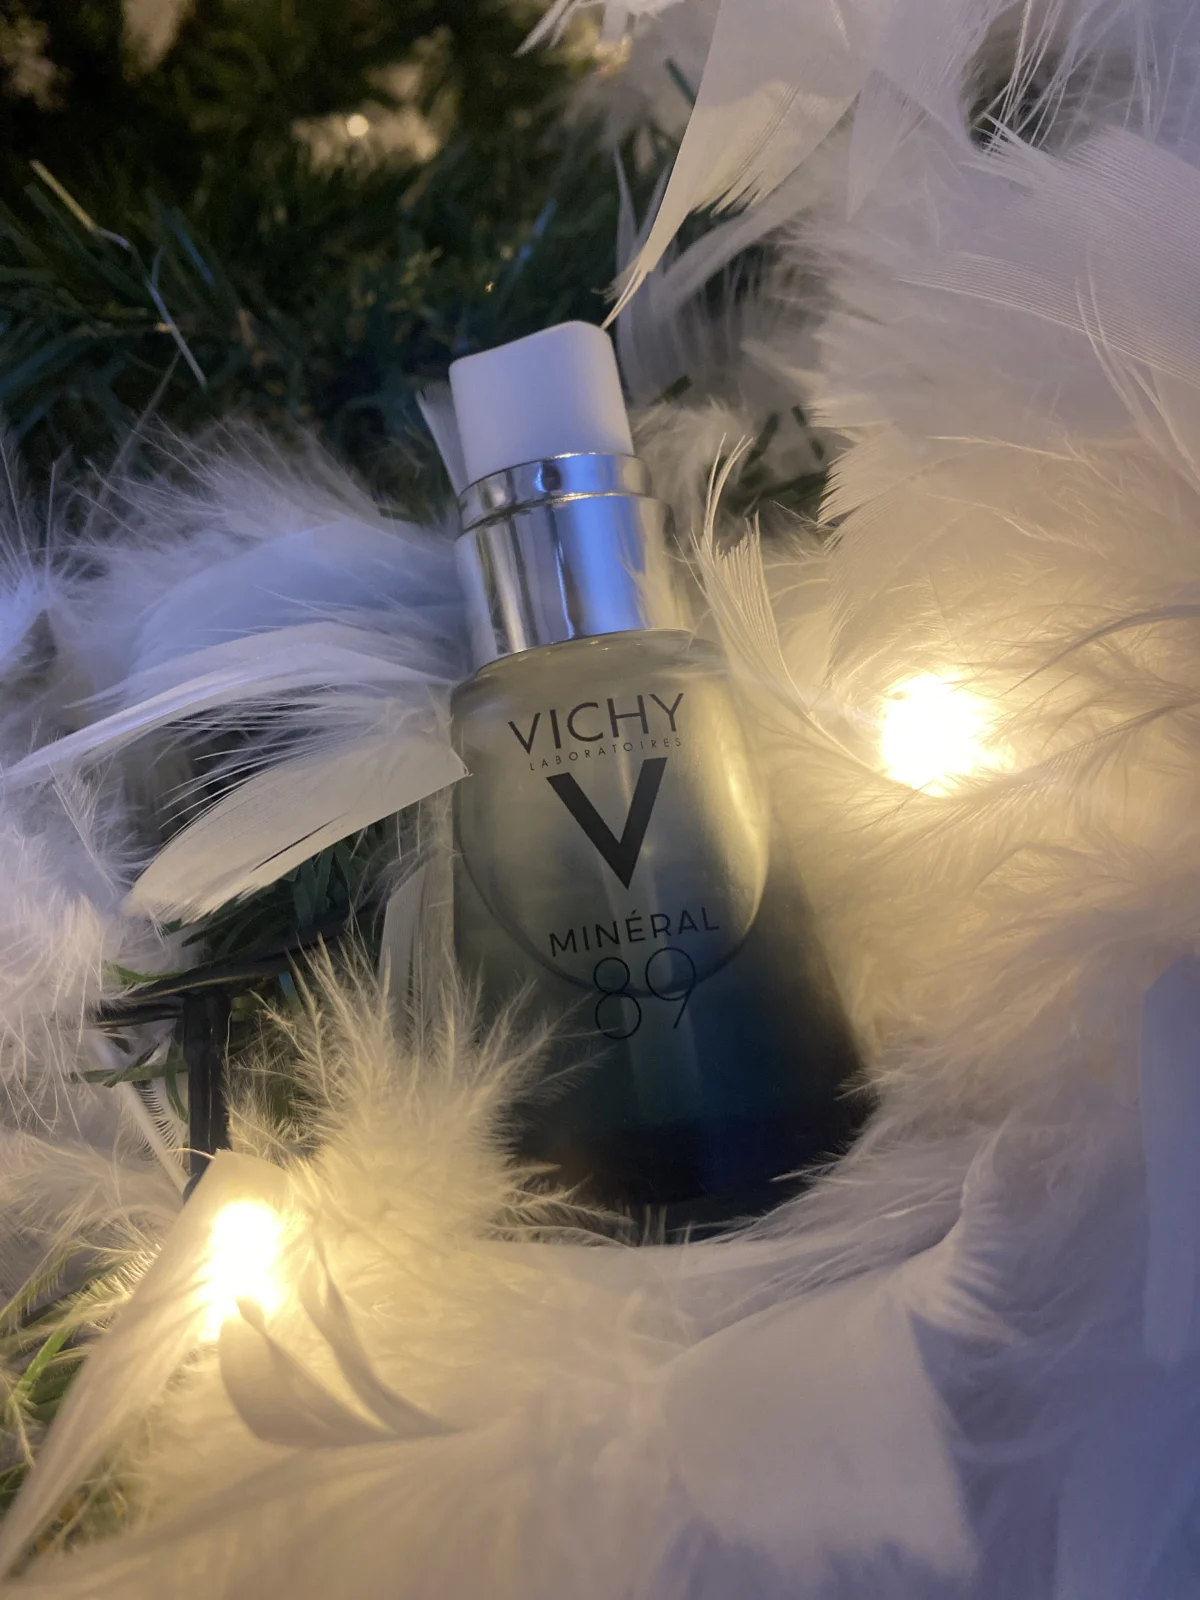 Vichy mineral 89 - review image